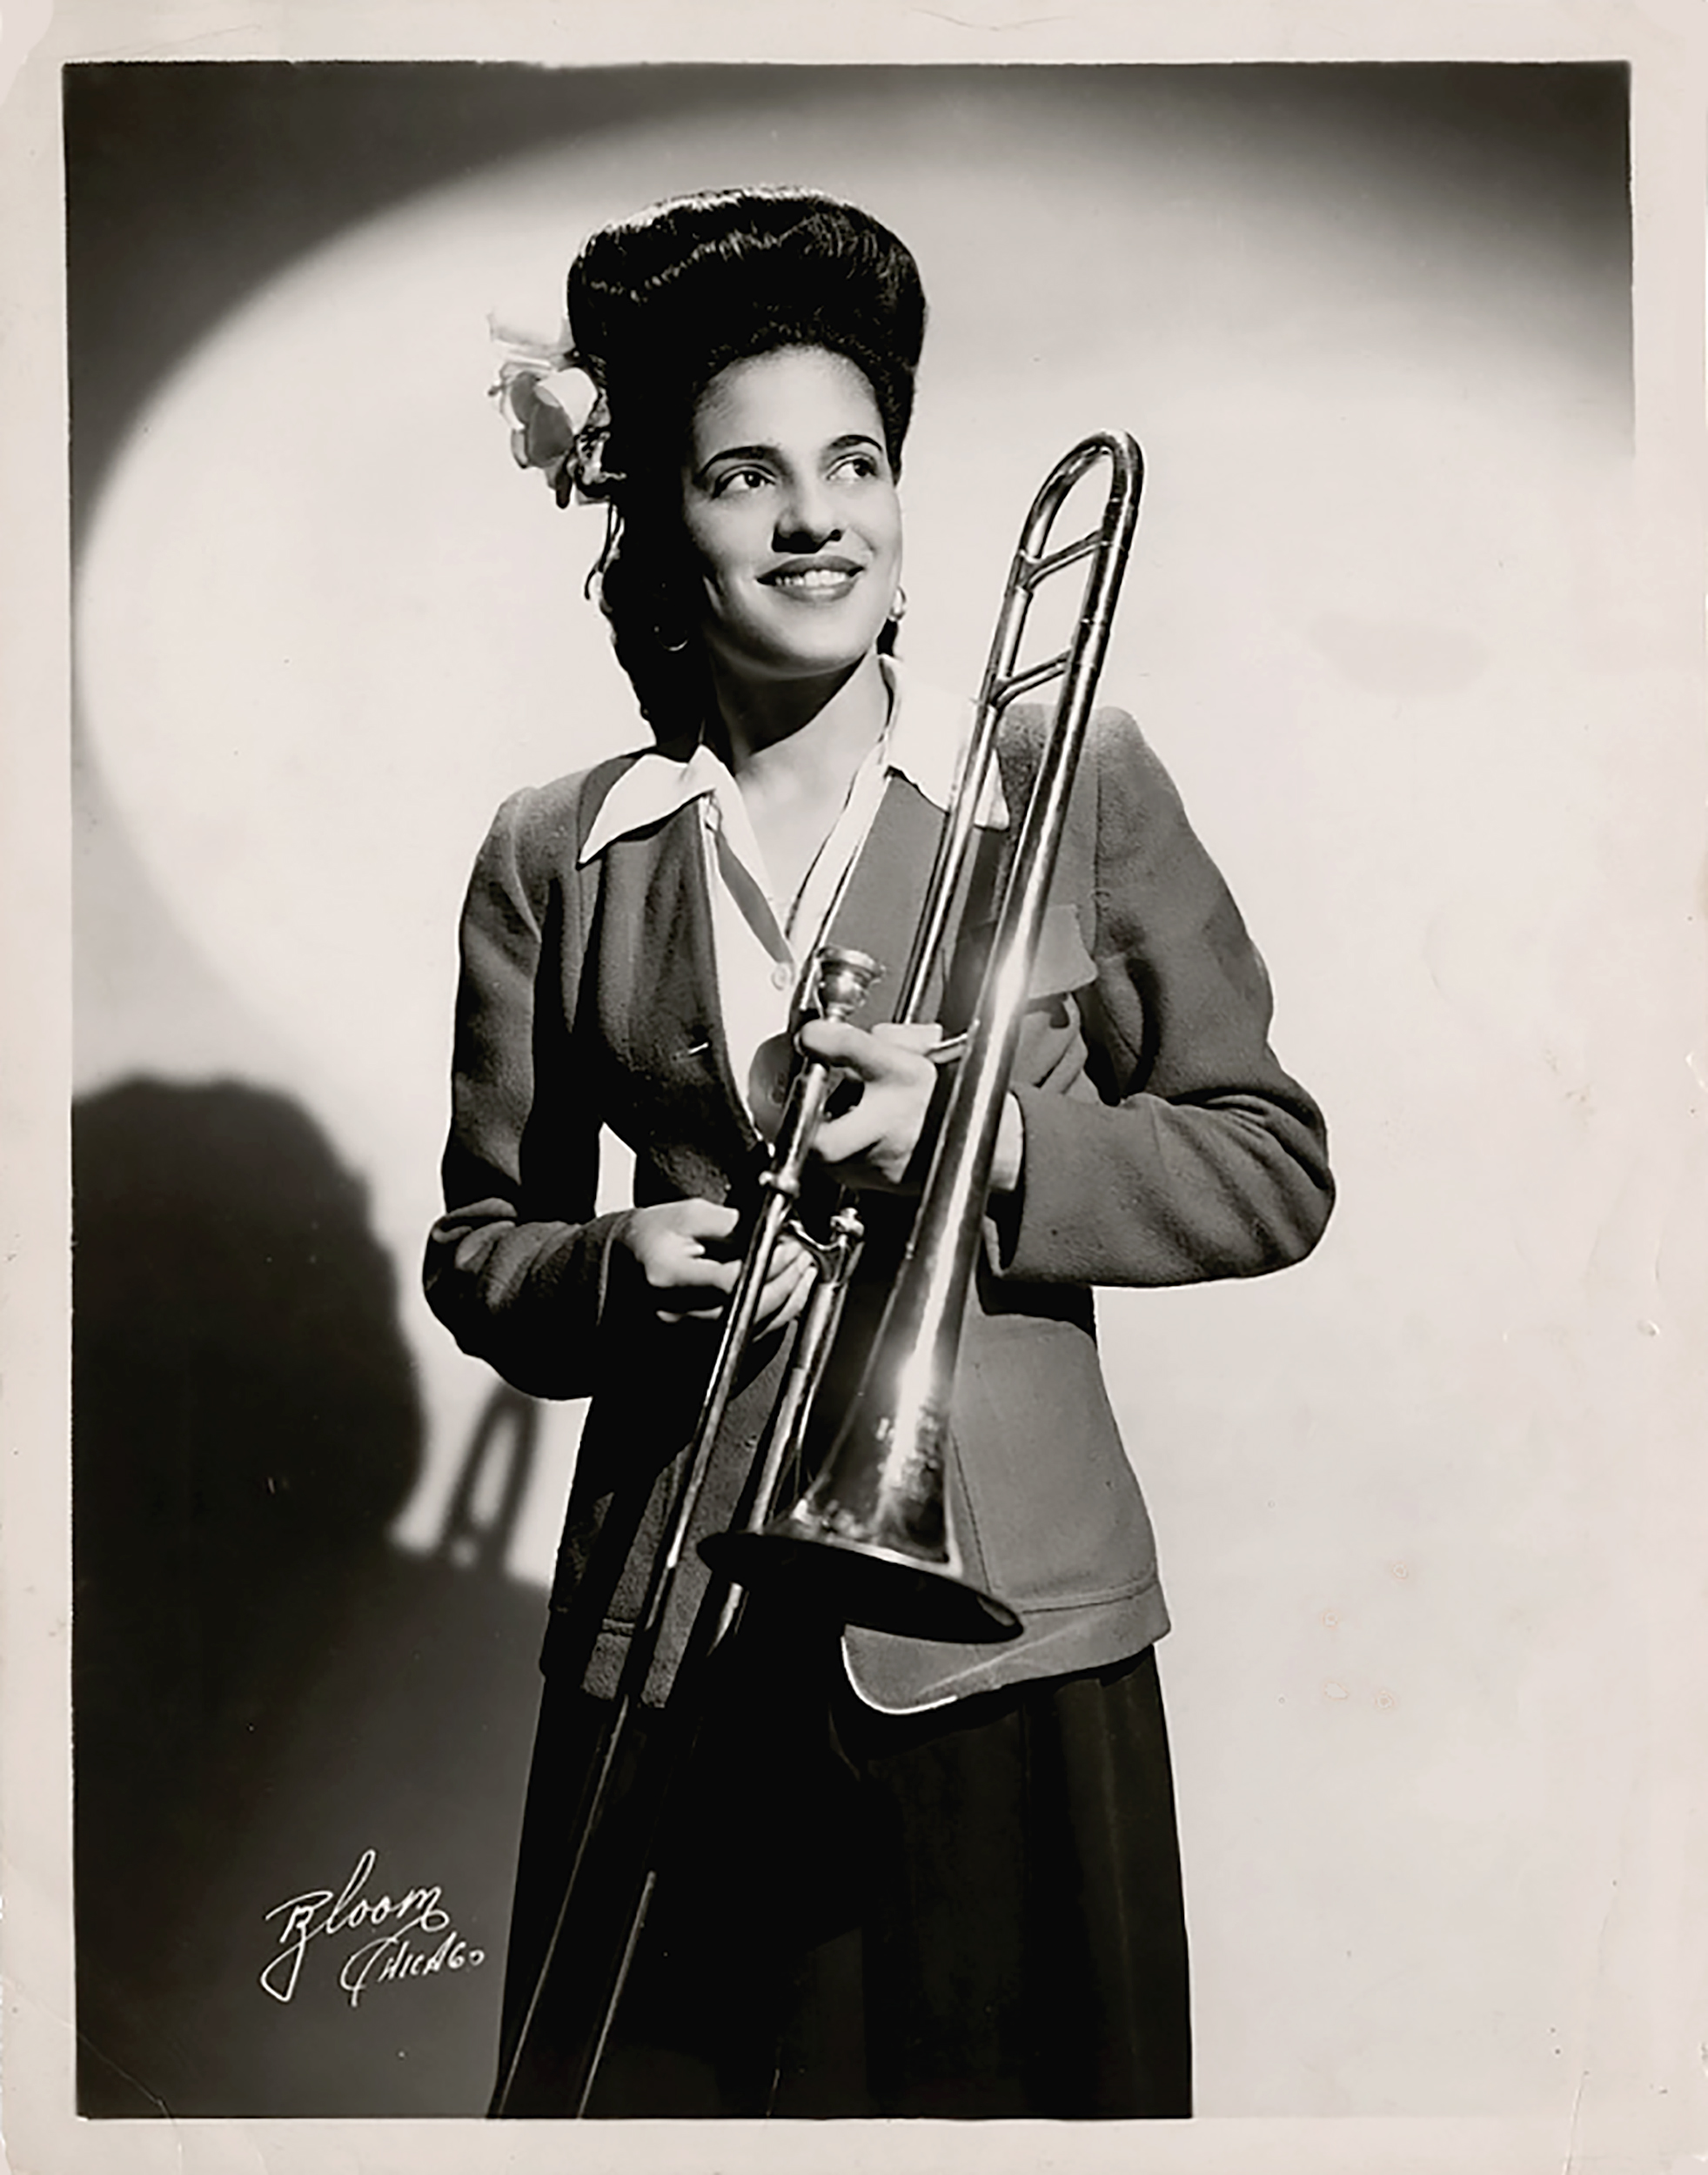 NMAH Archives CenterInternational Sweethearts of Rhythm Collection 1218 Series 3: Dixie Hardy Moon Materials Box 3 Folder 2 Photographer Stamp: Bloom Chicago Member of the International Sweethearts of Rhythm, trombonist